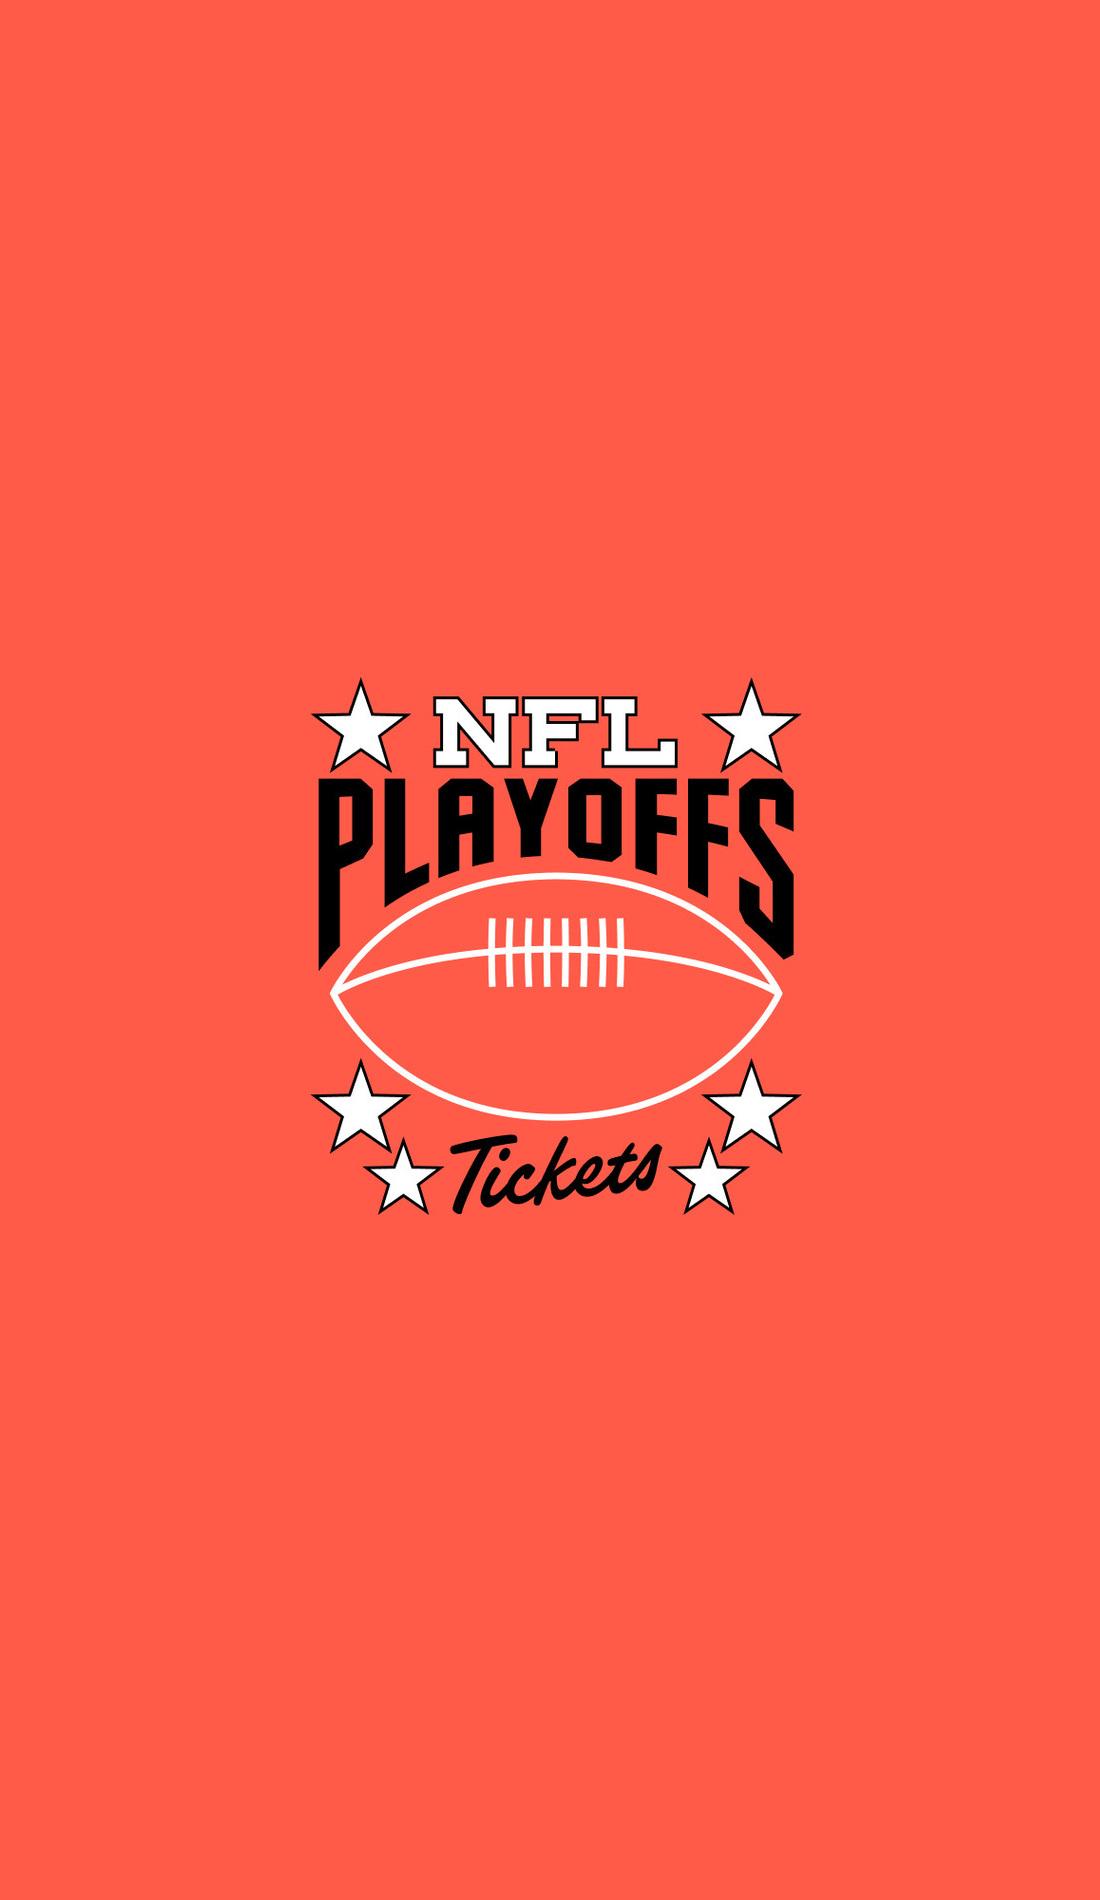 price of afc championship tickets